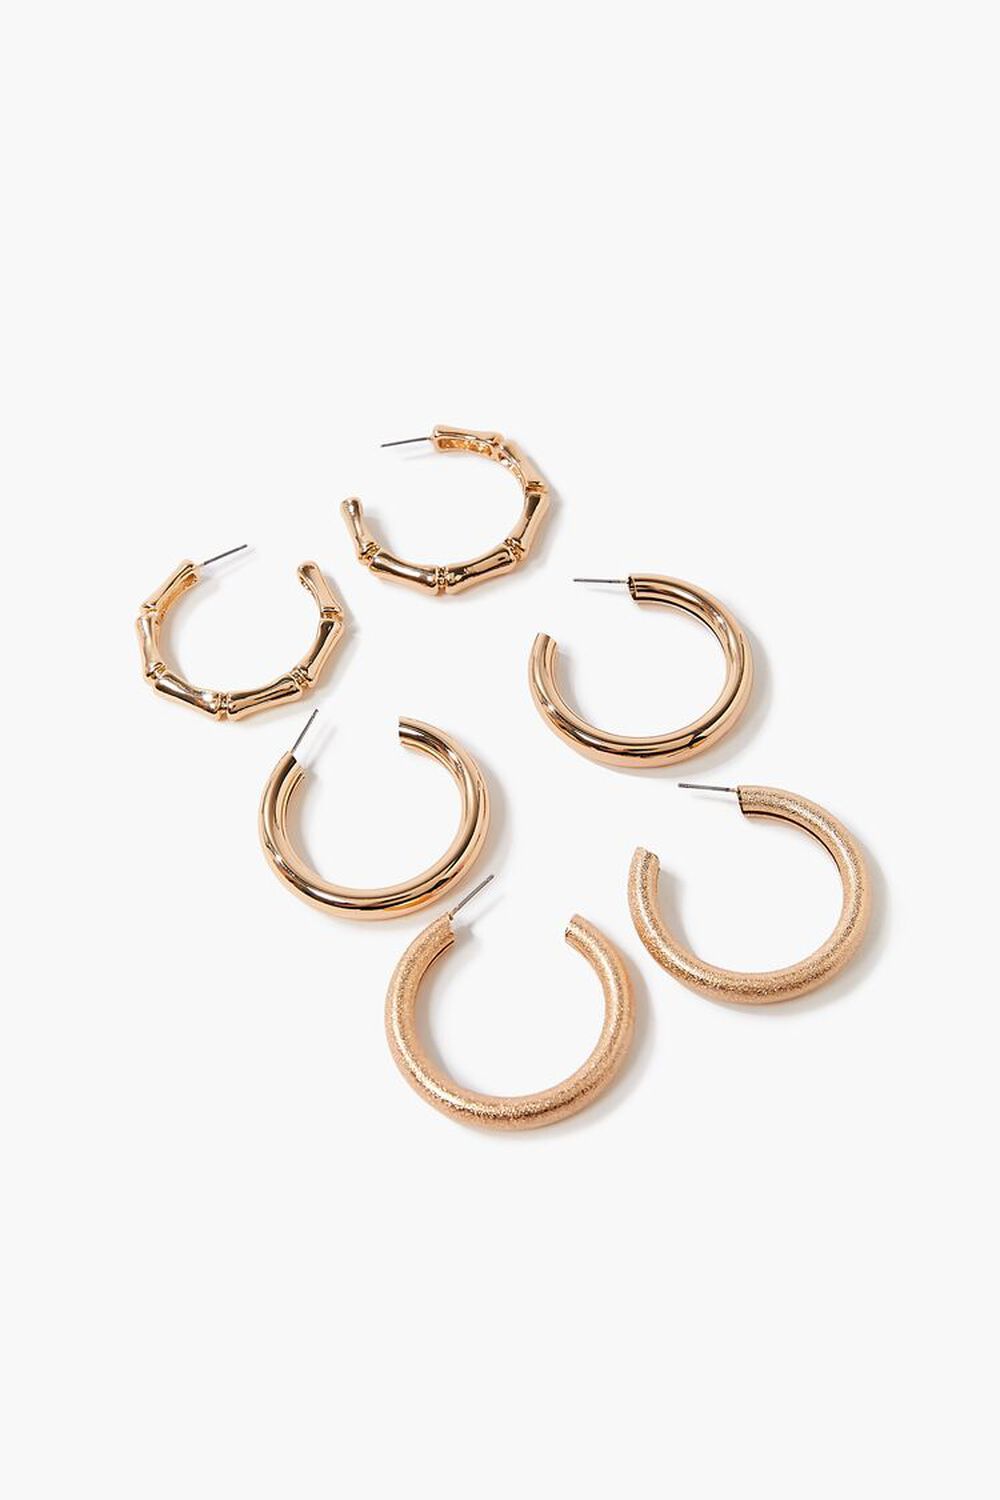 GOLD Upcycled Open-End Hoop Earring Set, image 1